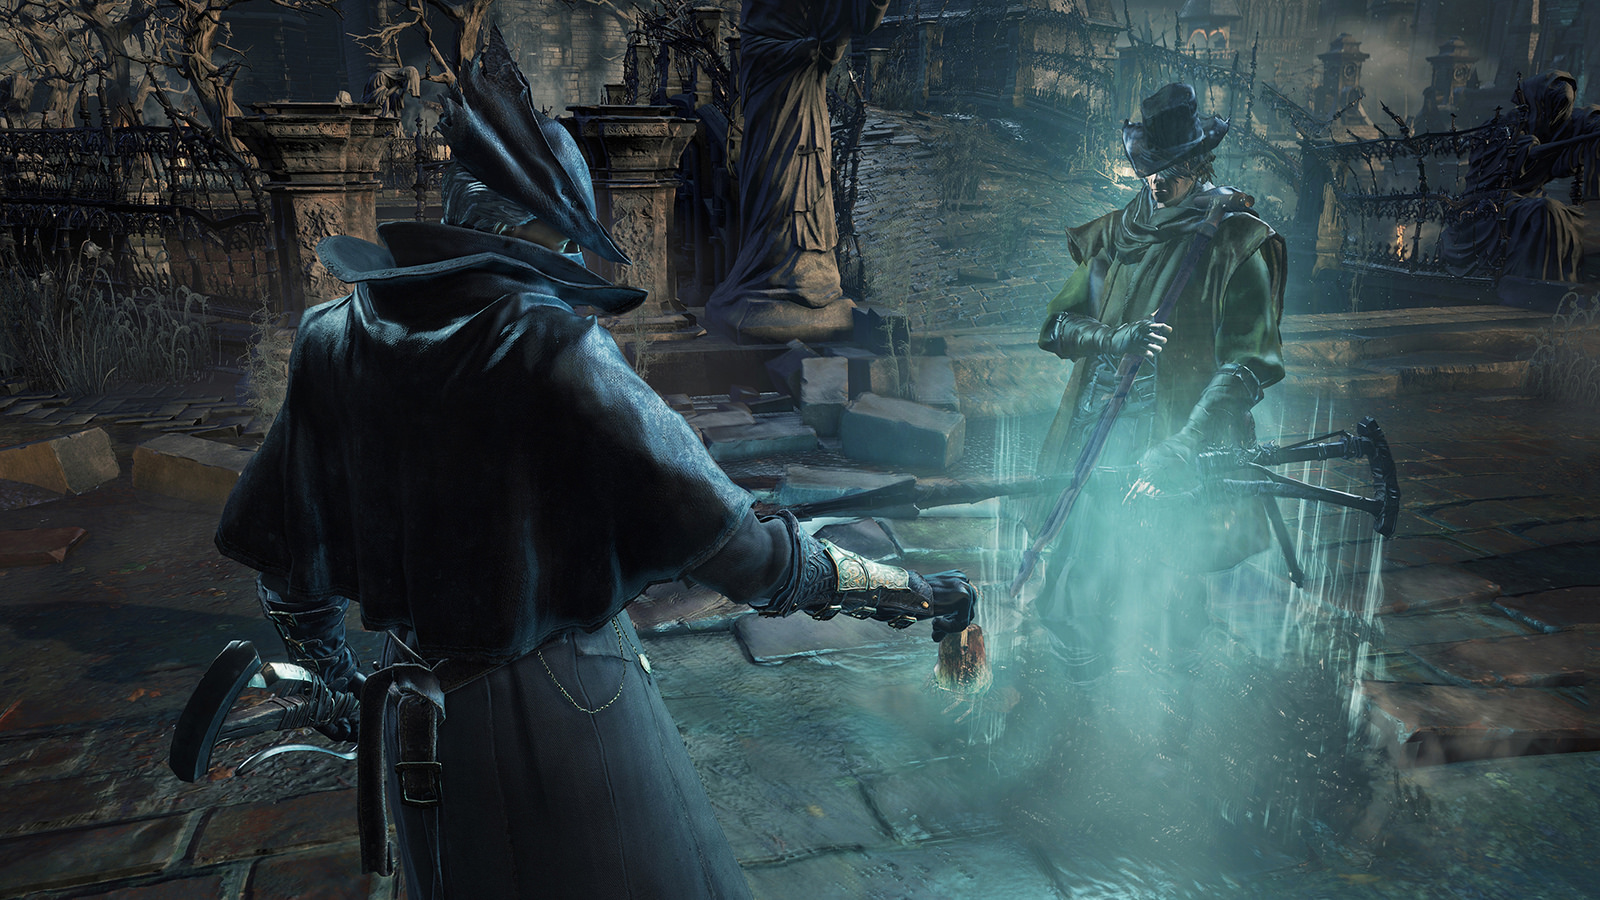 How Bloodborne On PC Can Improve From The PS4 Version